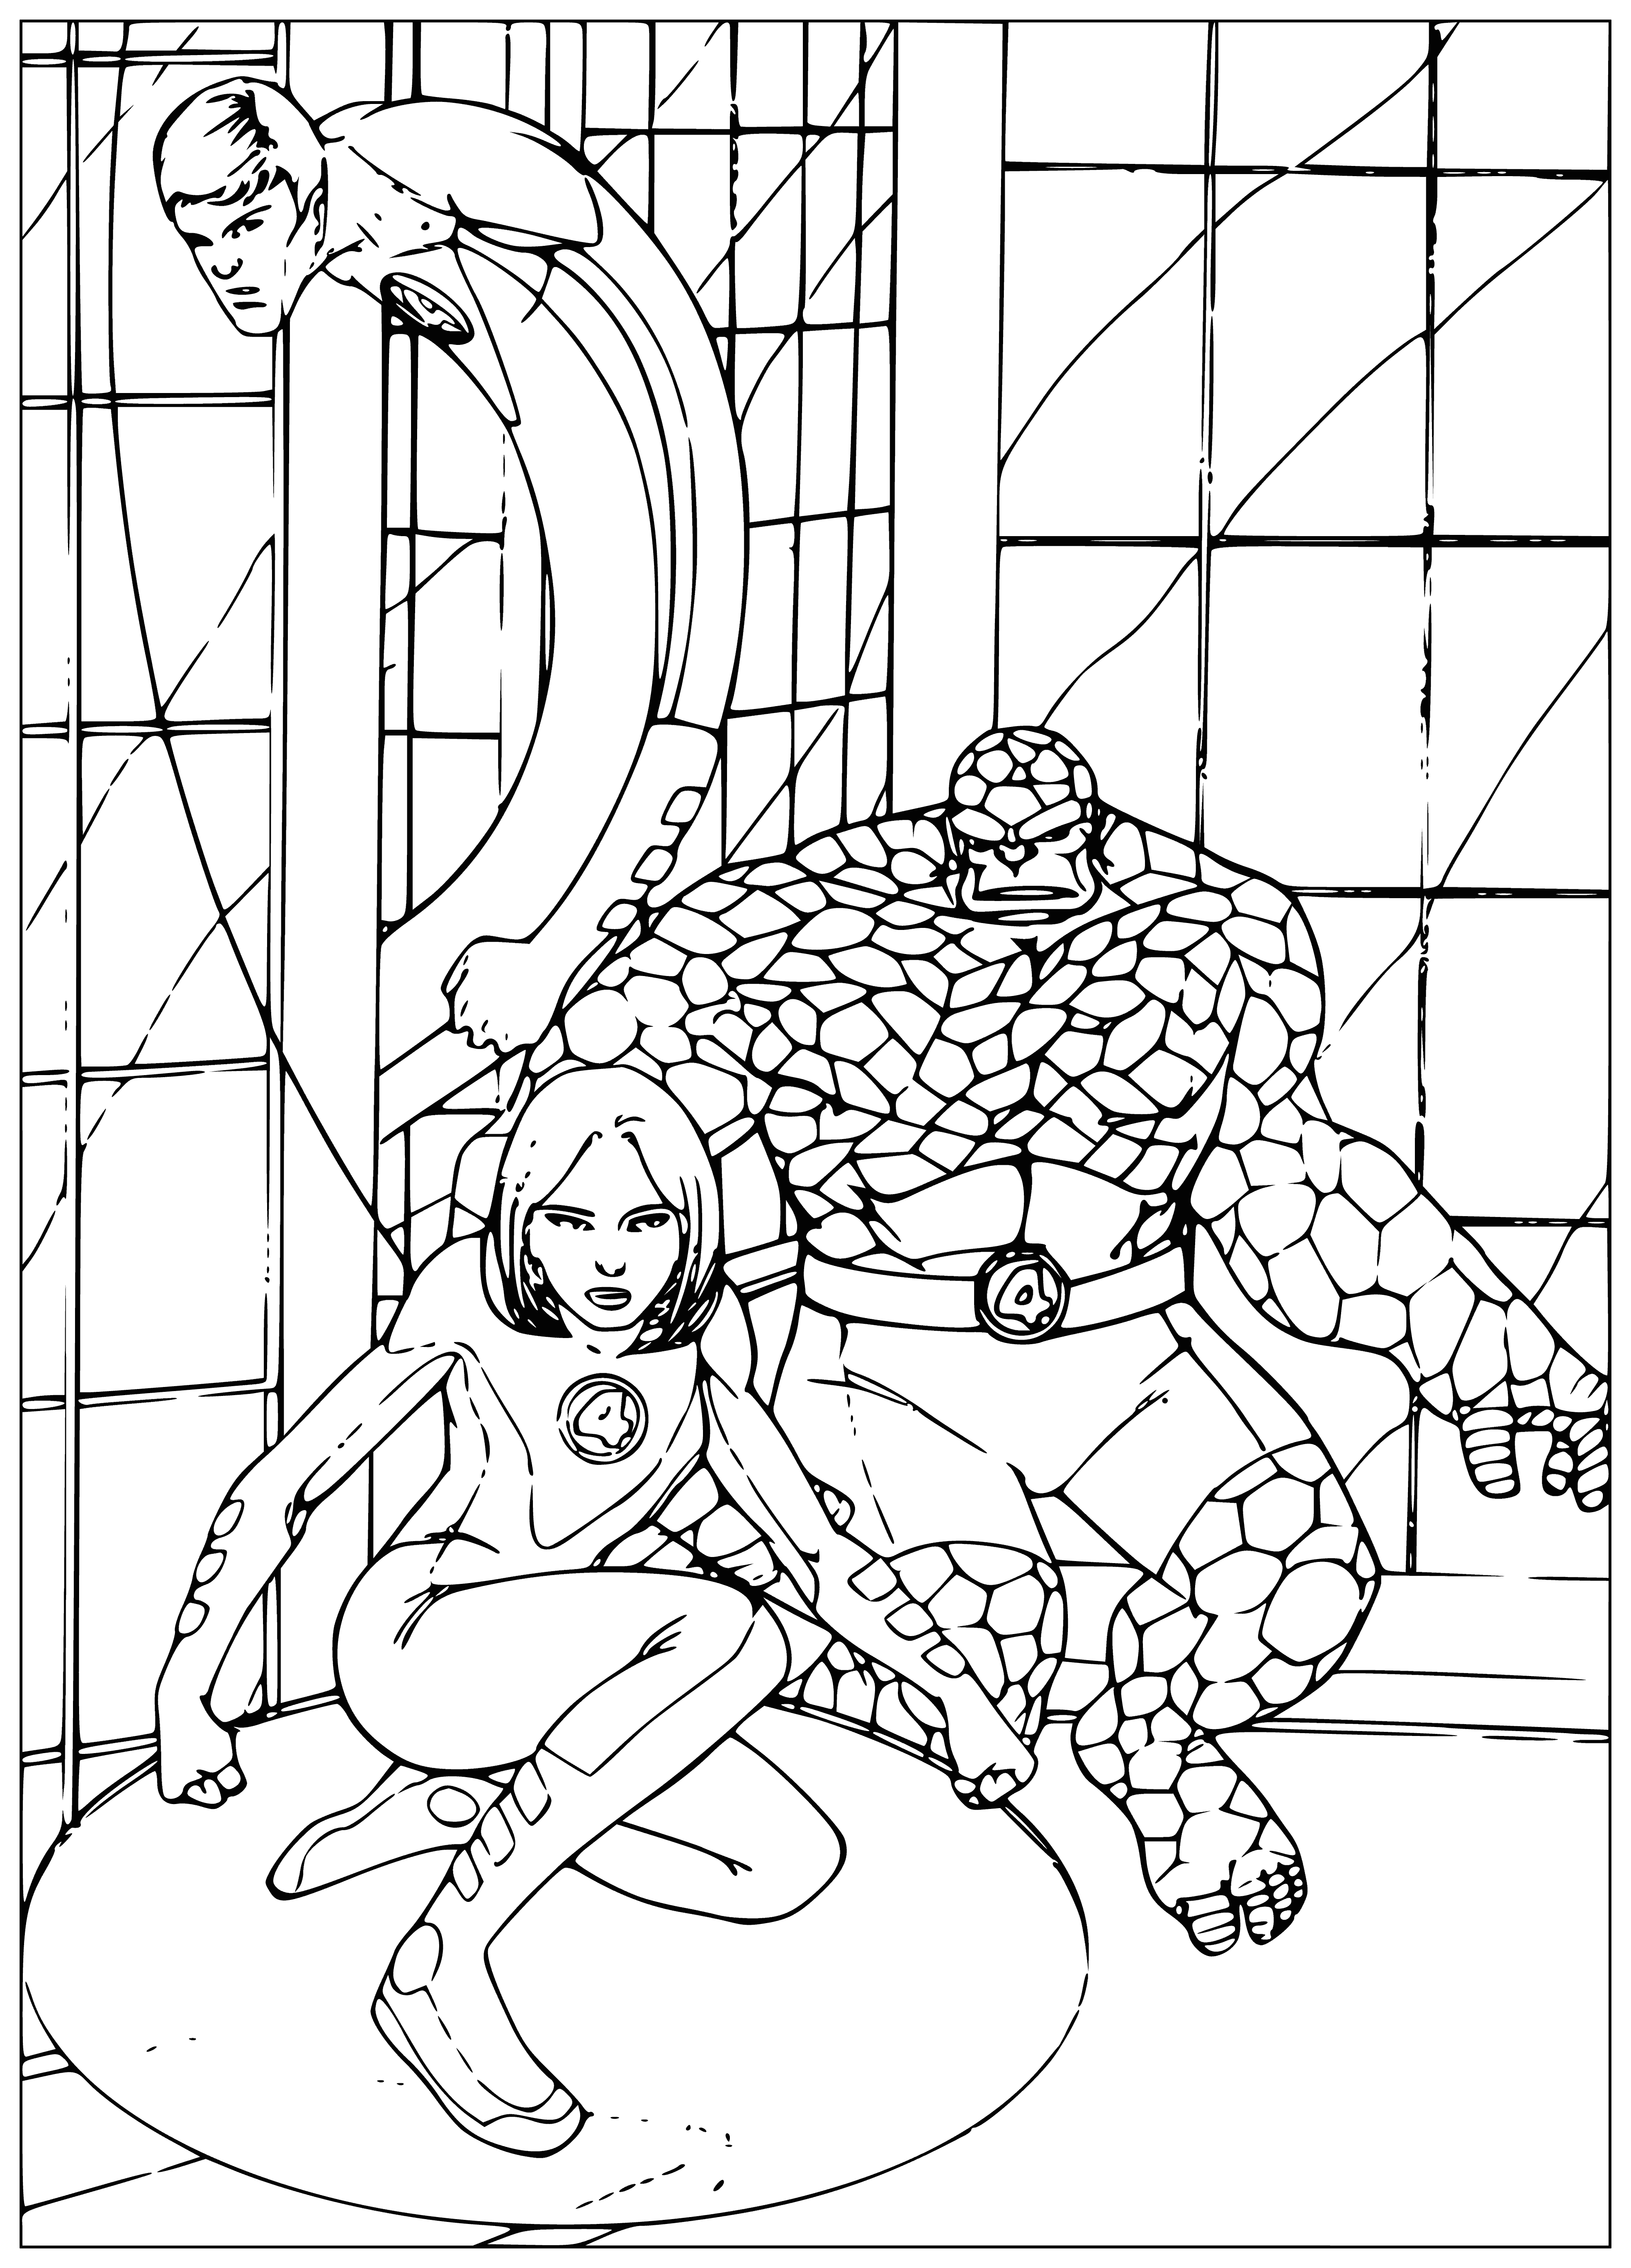 coloring page: Four heroes: Mr. Fantastic, Invisible Woman, Human Torch and Thing use unique abilities together to protect the world. Heroes have saved the world many times. #FantasticFour